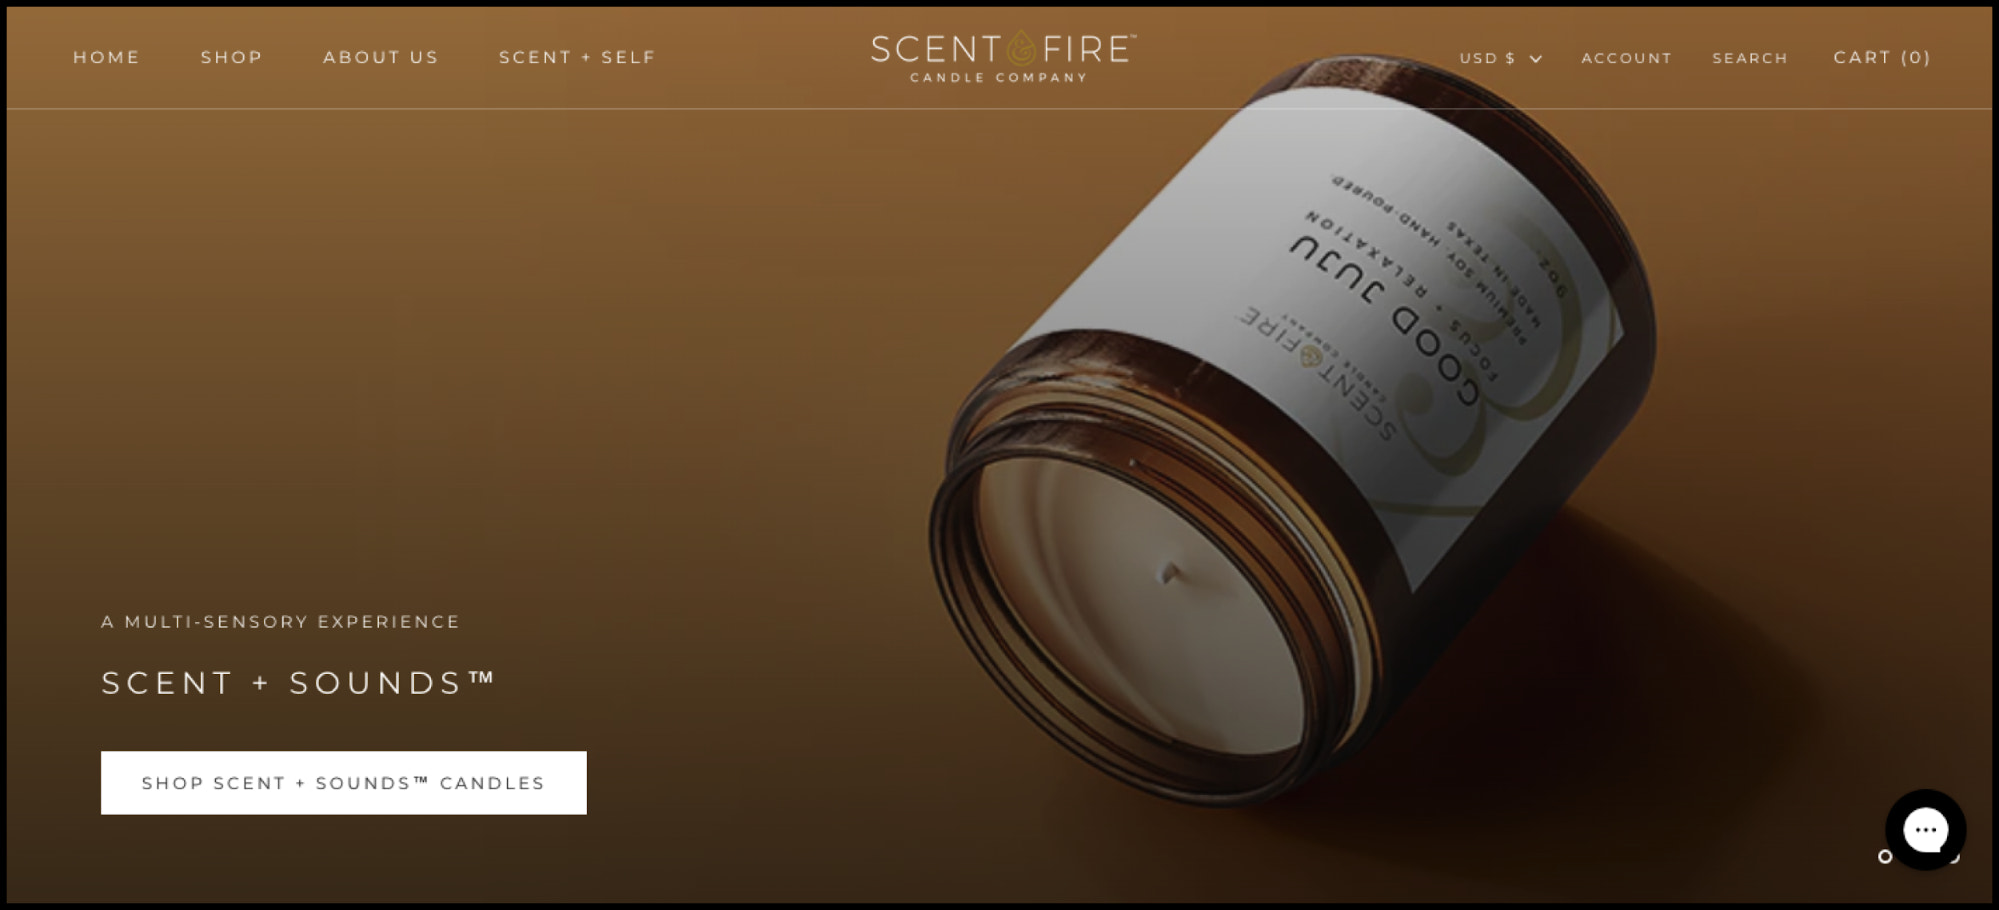 scent-and-fire-website-hero-image-example